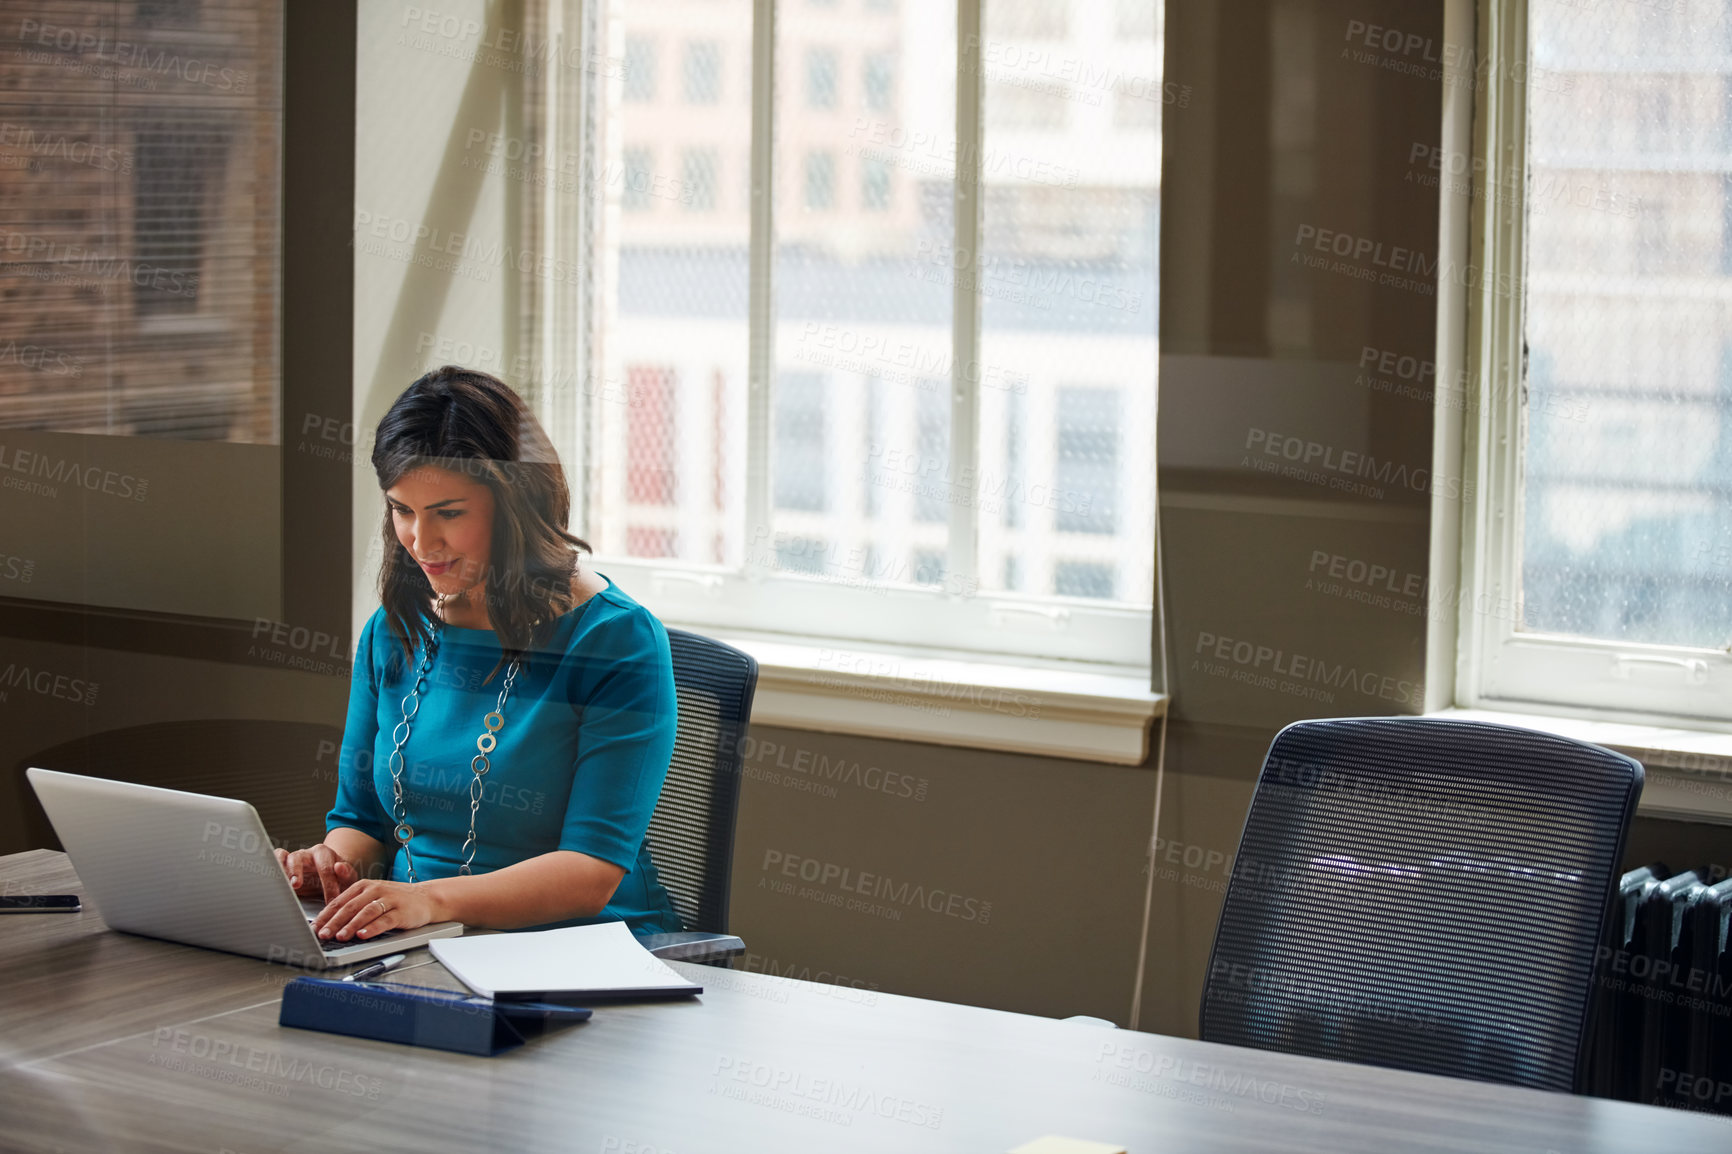 Buy stock photo Shot of a businesswoman using a laptop in an office